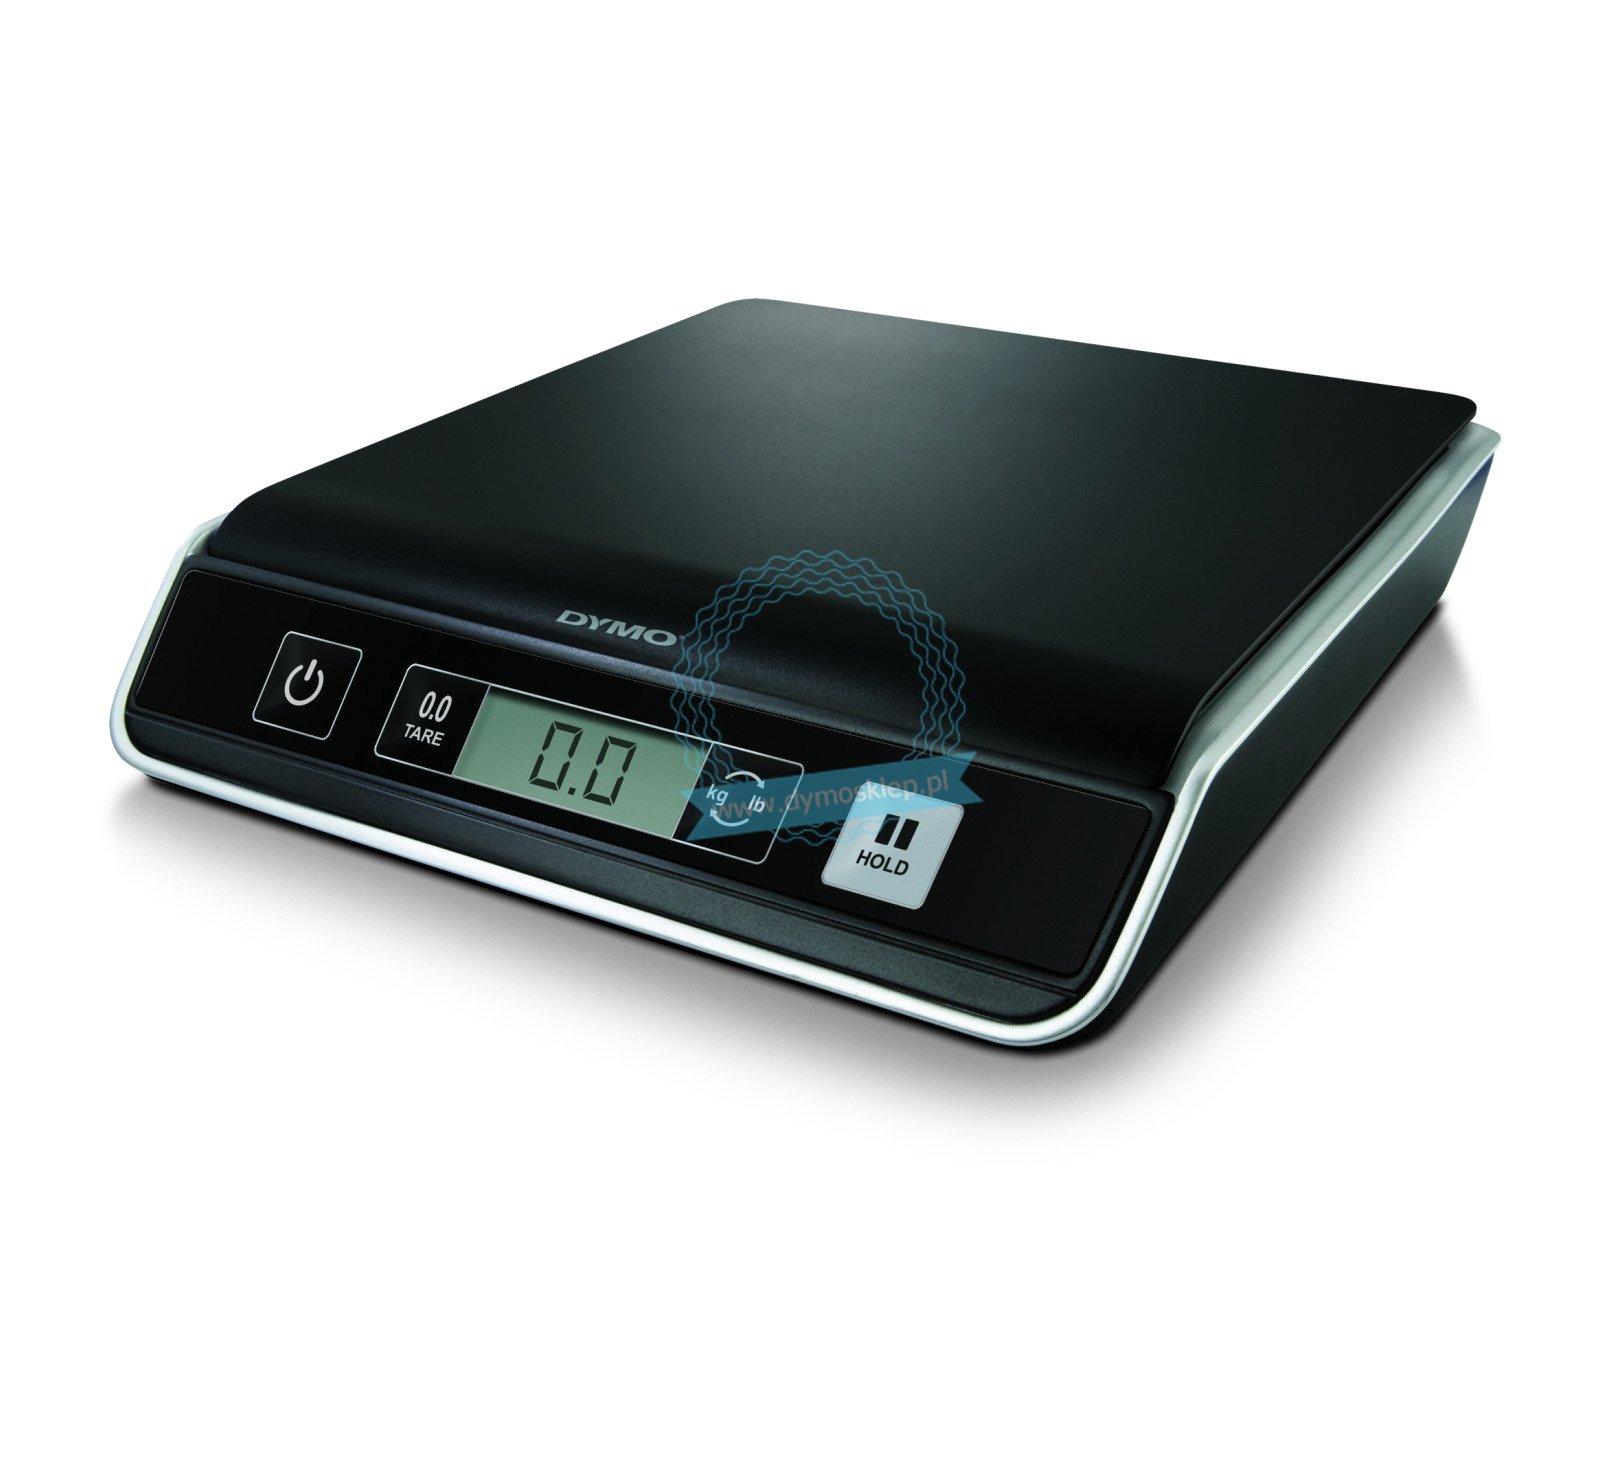 Dymo S0929000 M5 Mailing Scales, 5 kg